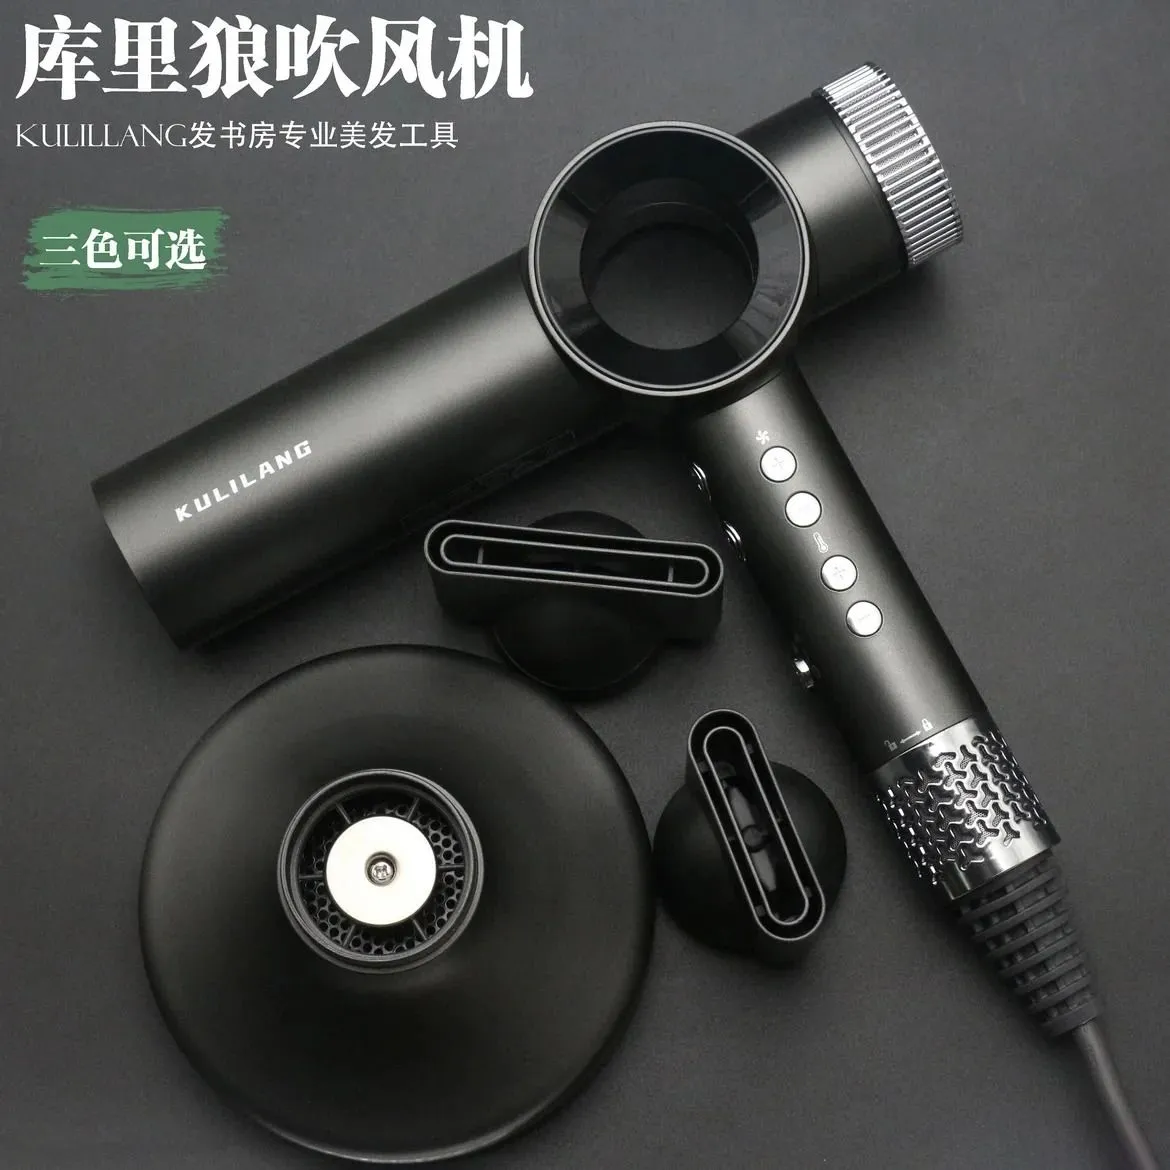 KULILANG Hairdryer Barbershop Special 110000 Turn Highspeed Brushless Professional Blowers Quick Drying Hair Salon 240116